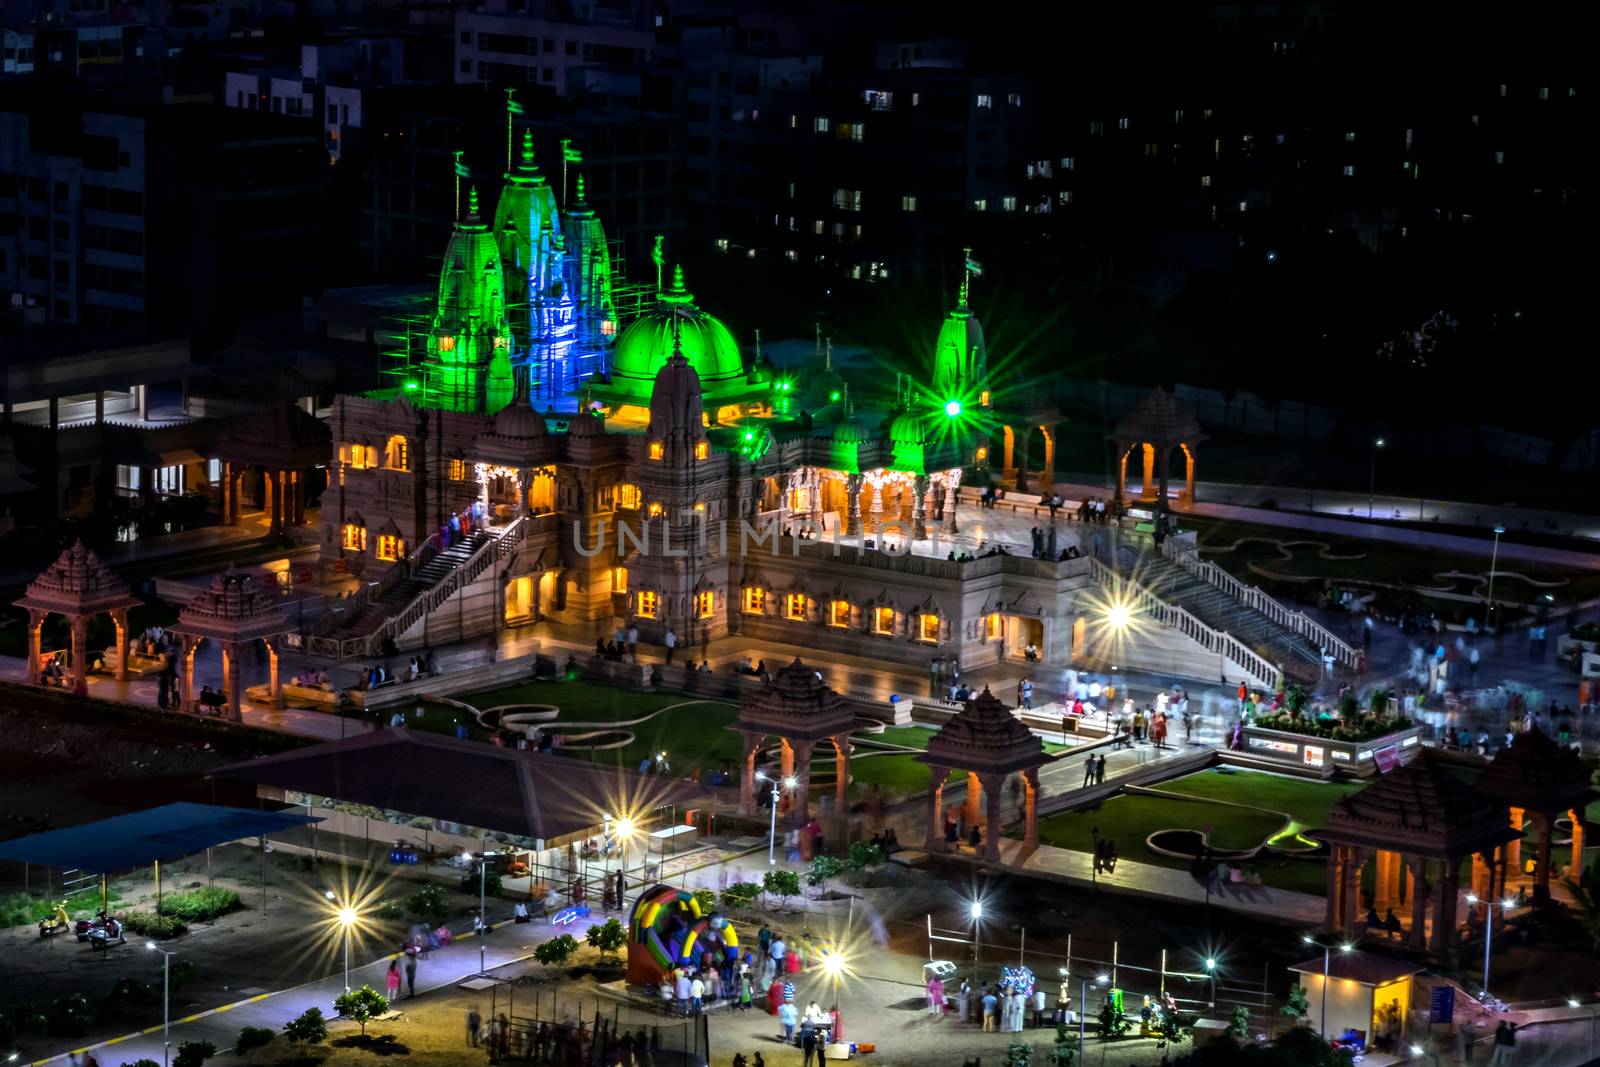 Night view of Shree Swaminarayan temple lit with green lights  in Pune. This is an excellent newly built temple located just down the hill. Lot of green landscape around the temple. A spacious place with lot of parking lot. Lot of Hindu festivals are celebrated here with decorations. Lighting during night is also awesome.